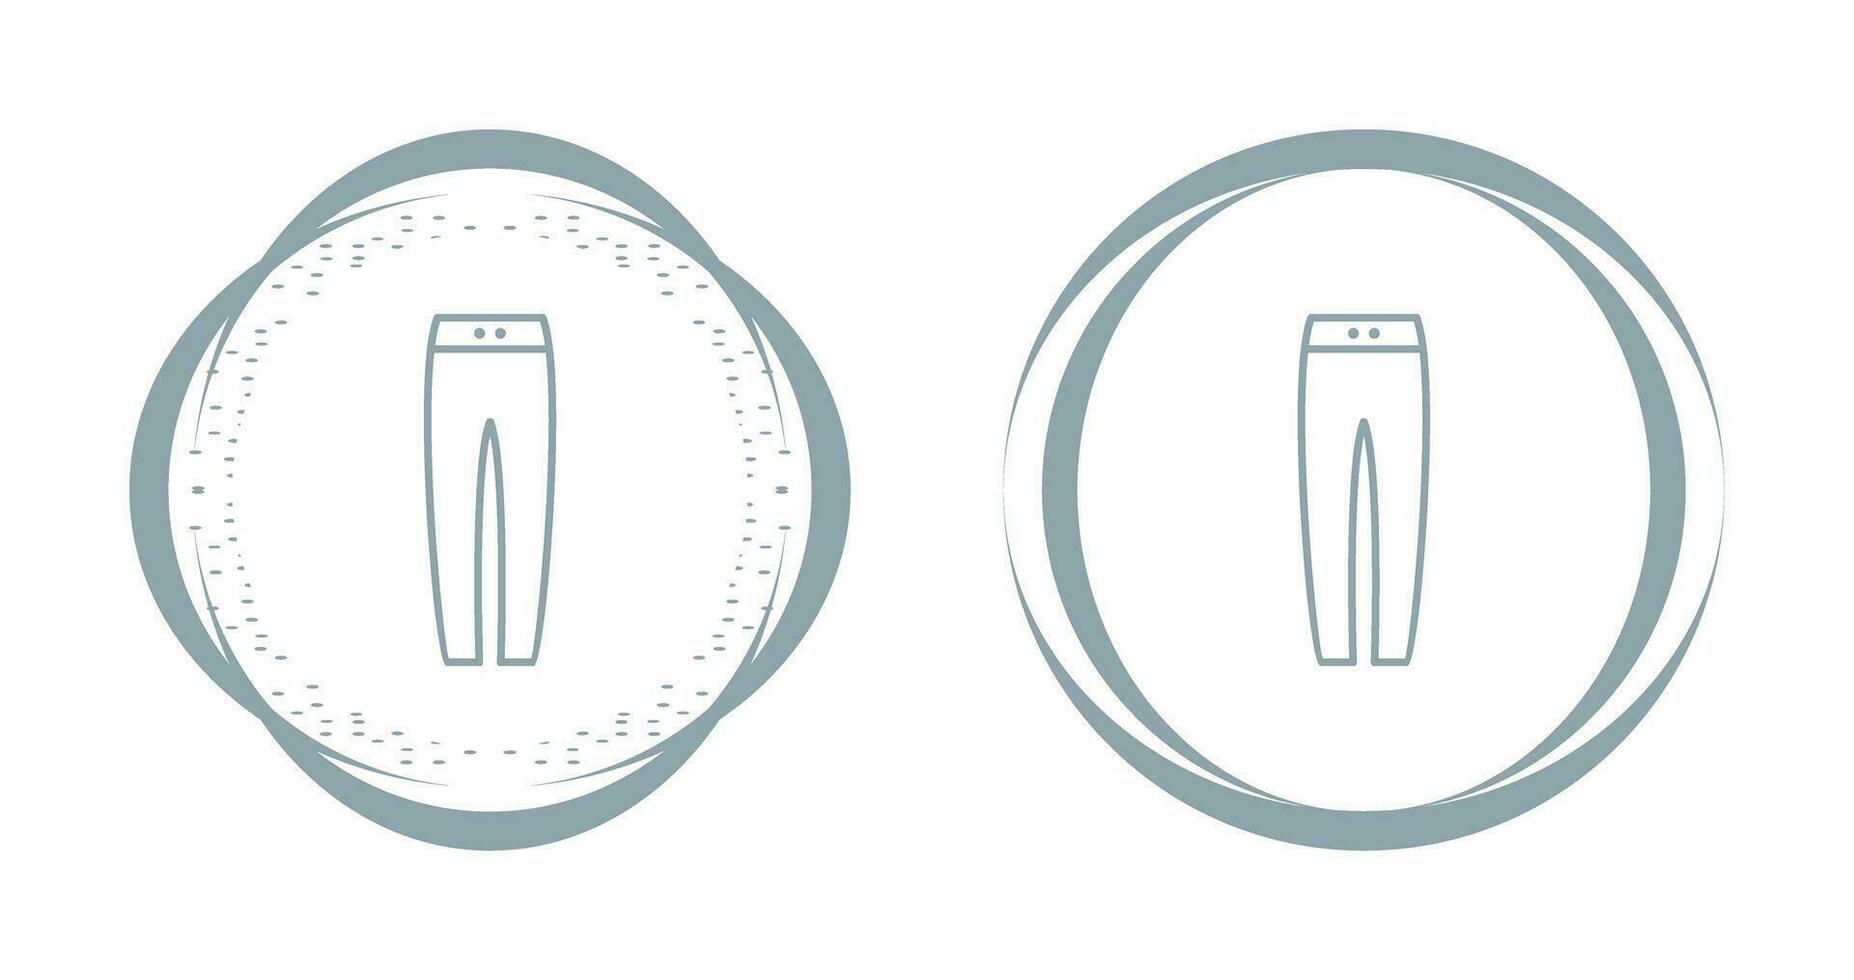 Warm Trousers Vector Icon